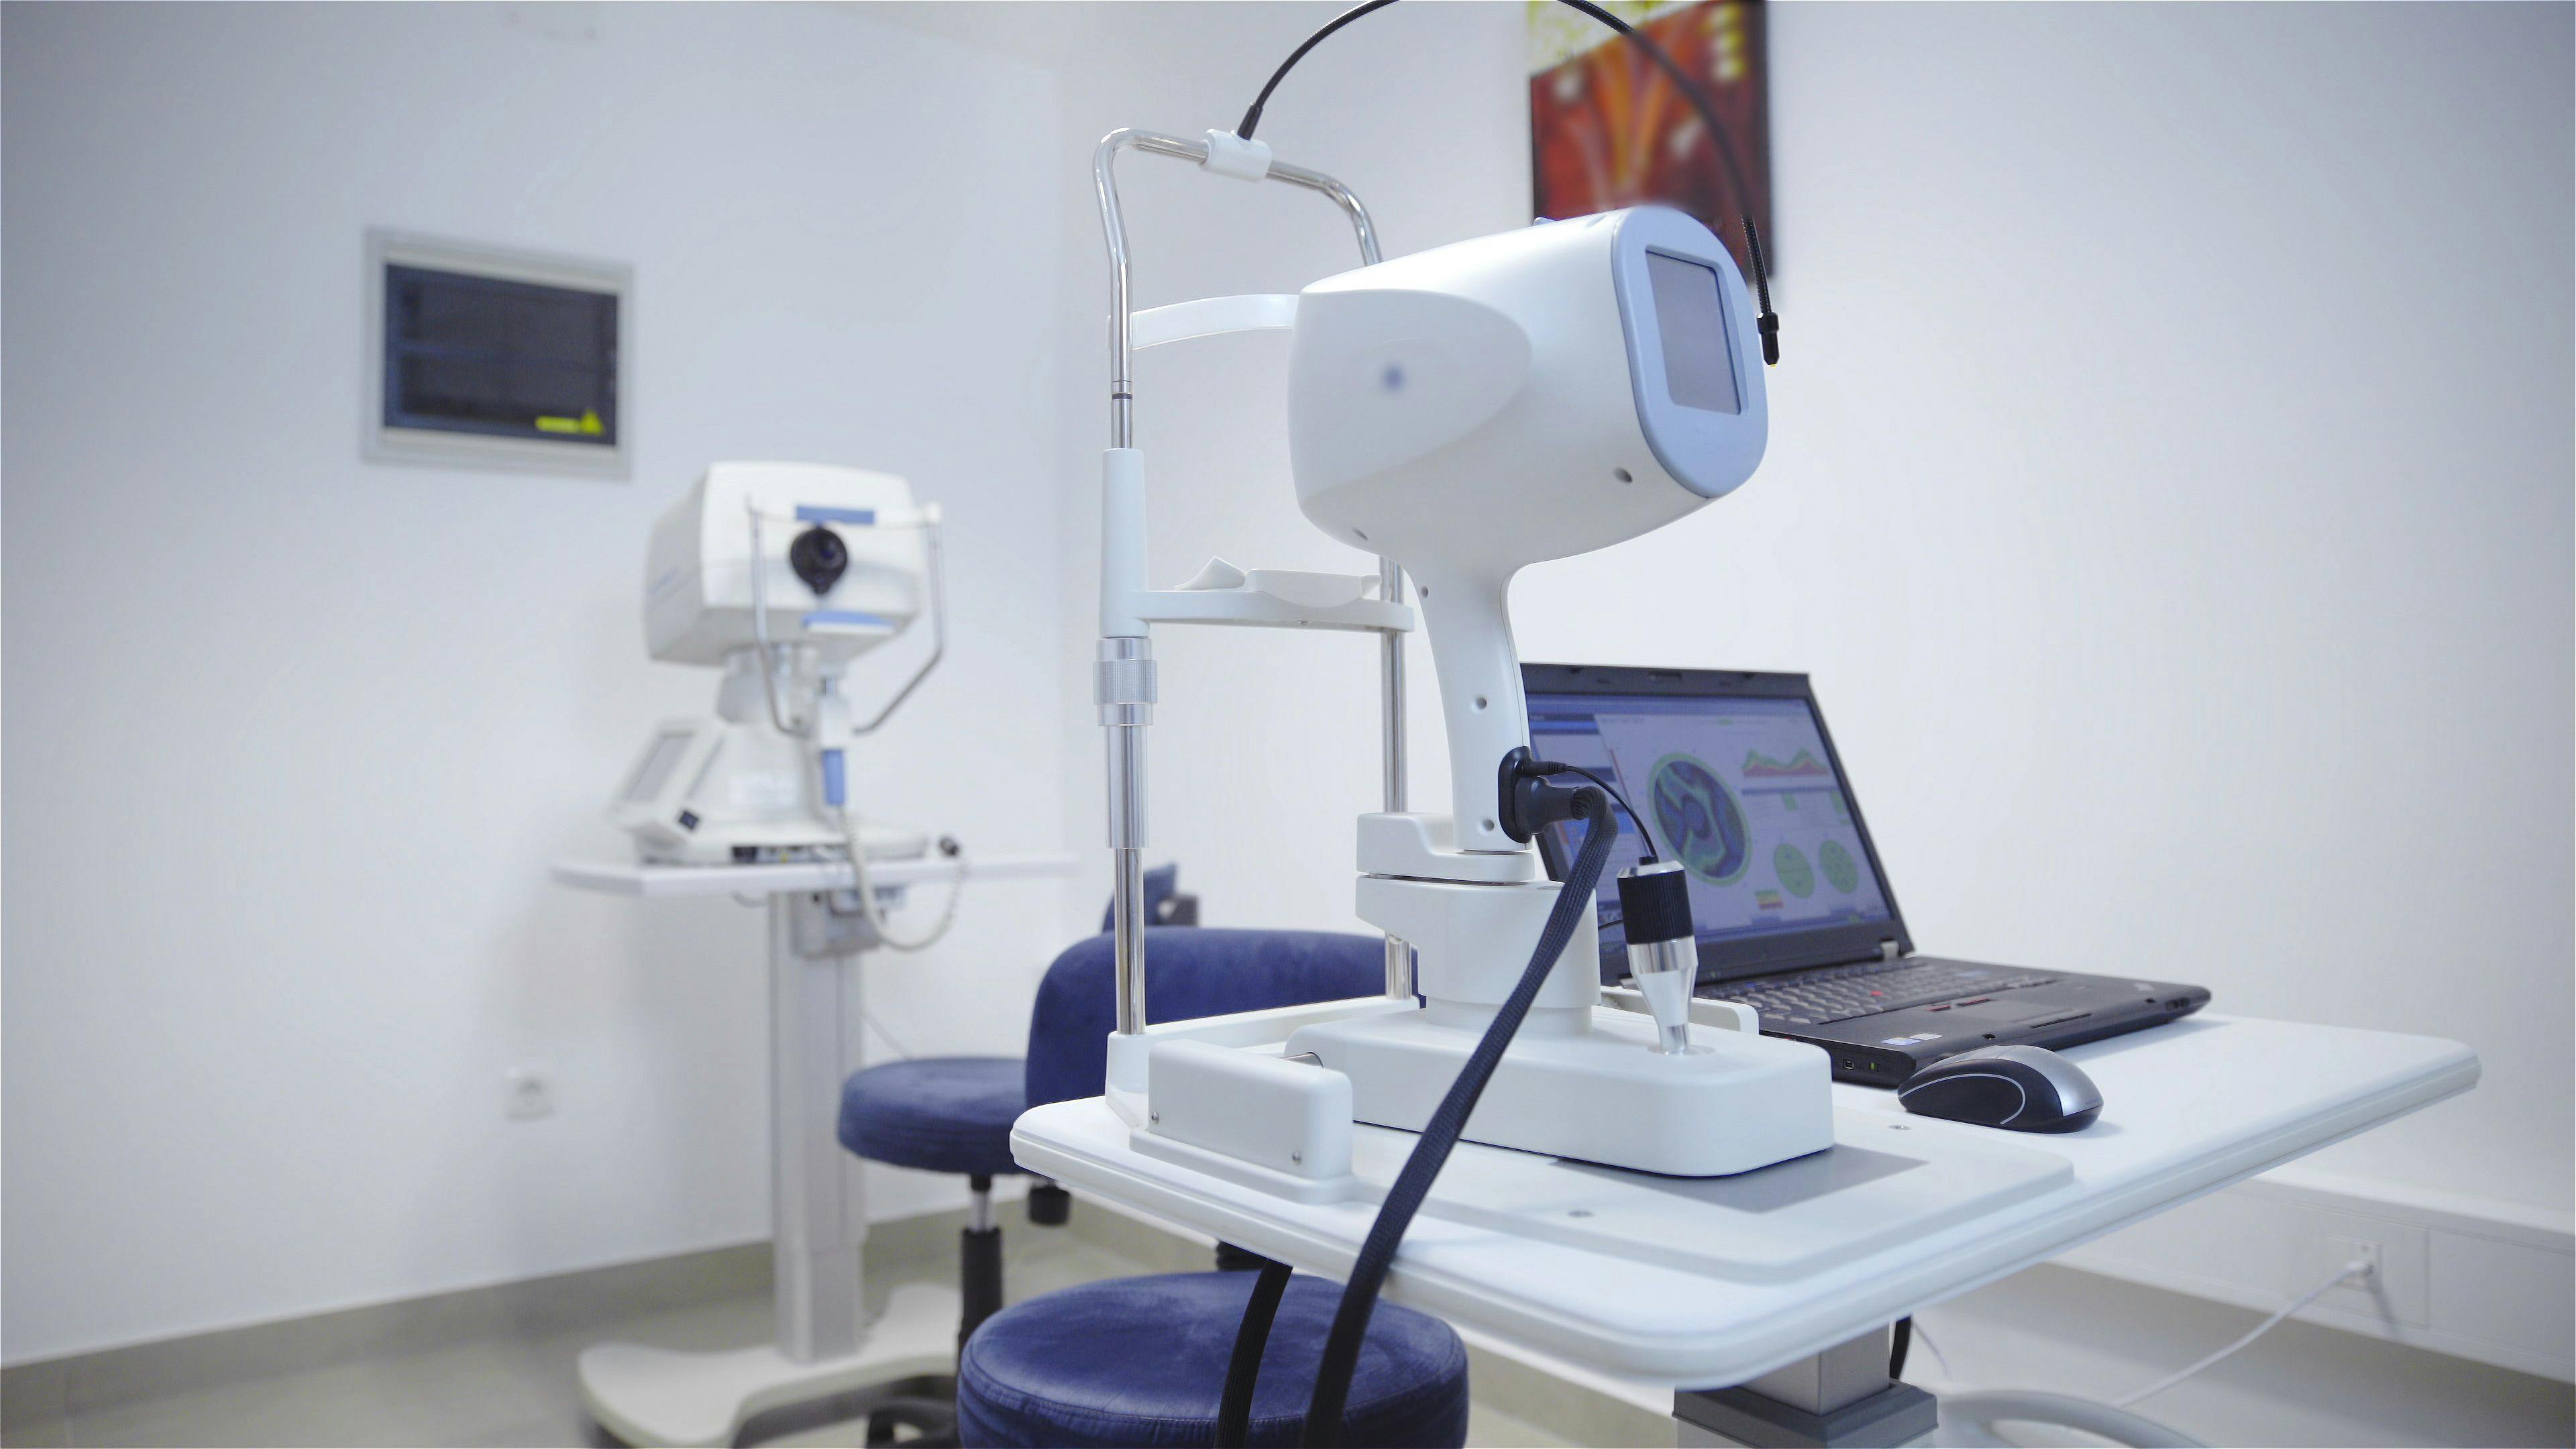 optometrist's office with equipment set up